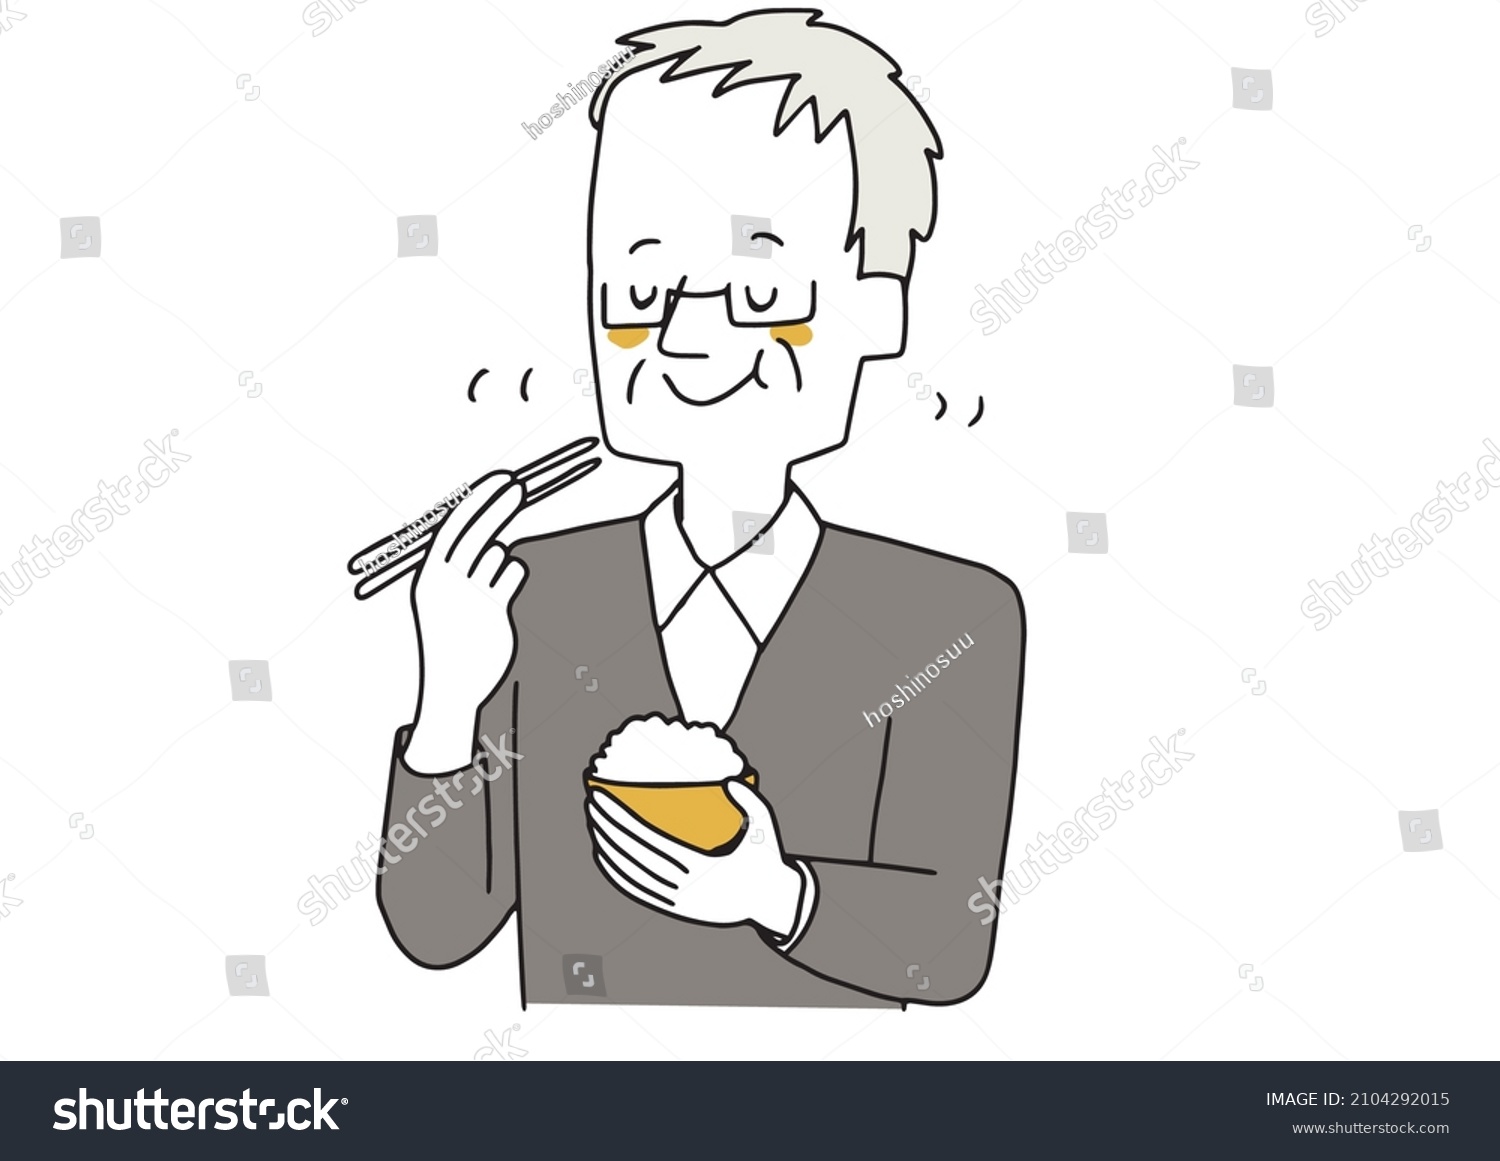 SVG of Elderly man who chews well and eats Warm hand-drawn portrait illustration Vector on a white background svg